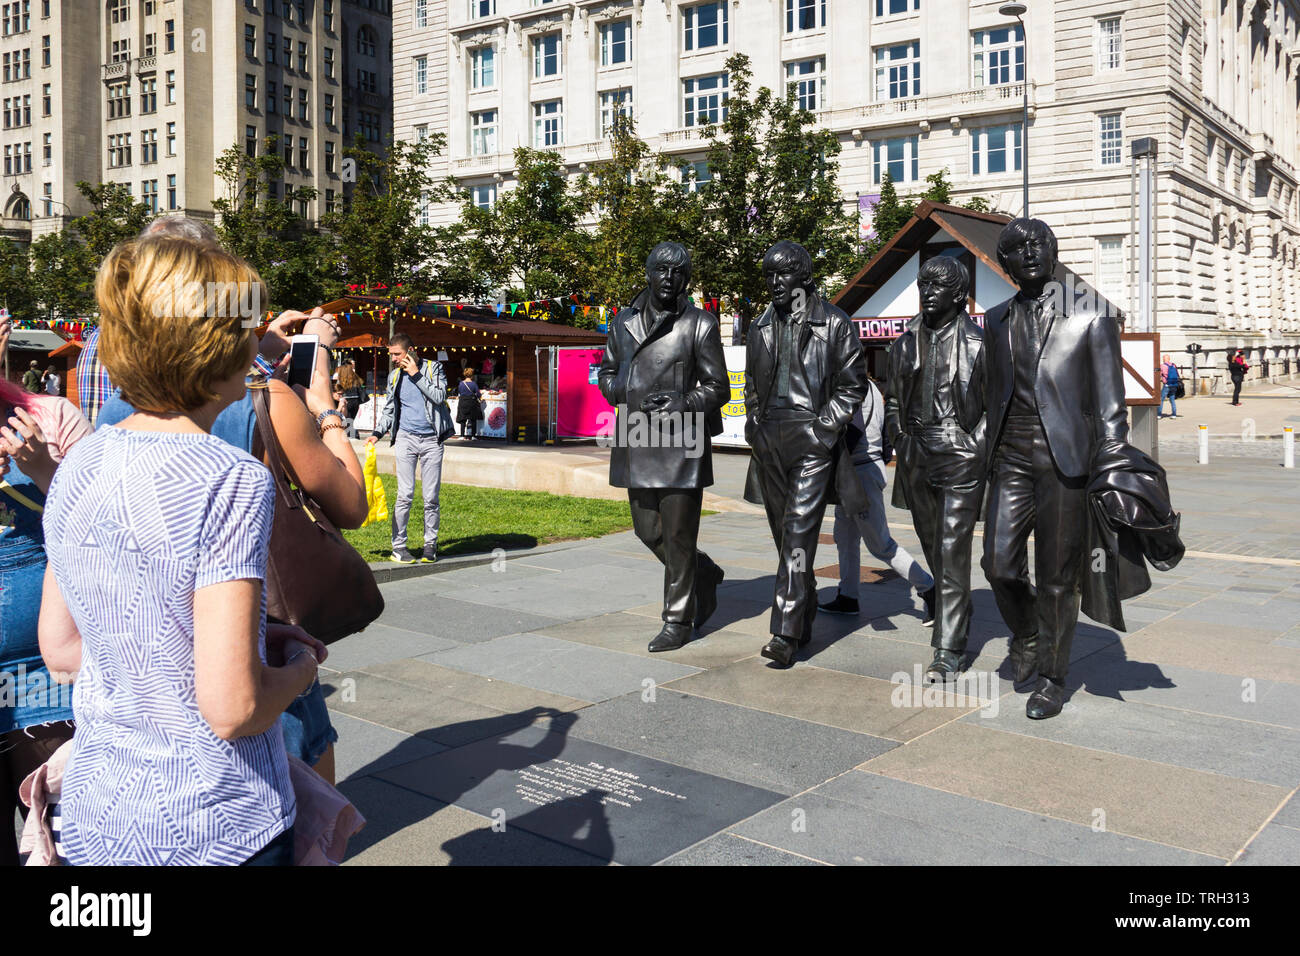 Tourists viewing the Beatles statue on Liverpool's Pier Head. The statue was unveiled in December 2015 and was a gift to the city by the Cavern Club. Stock Photo